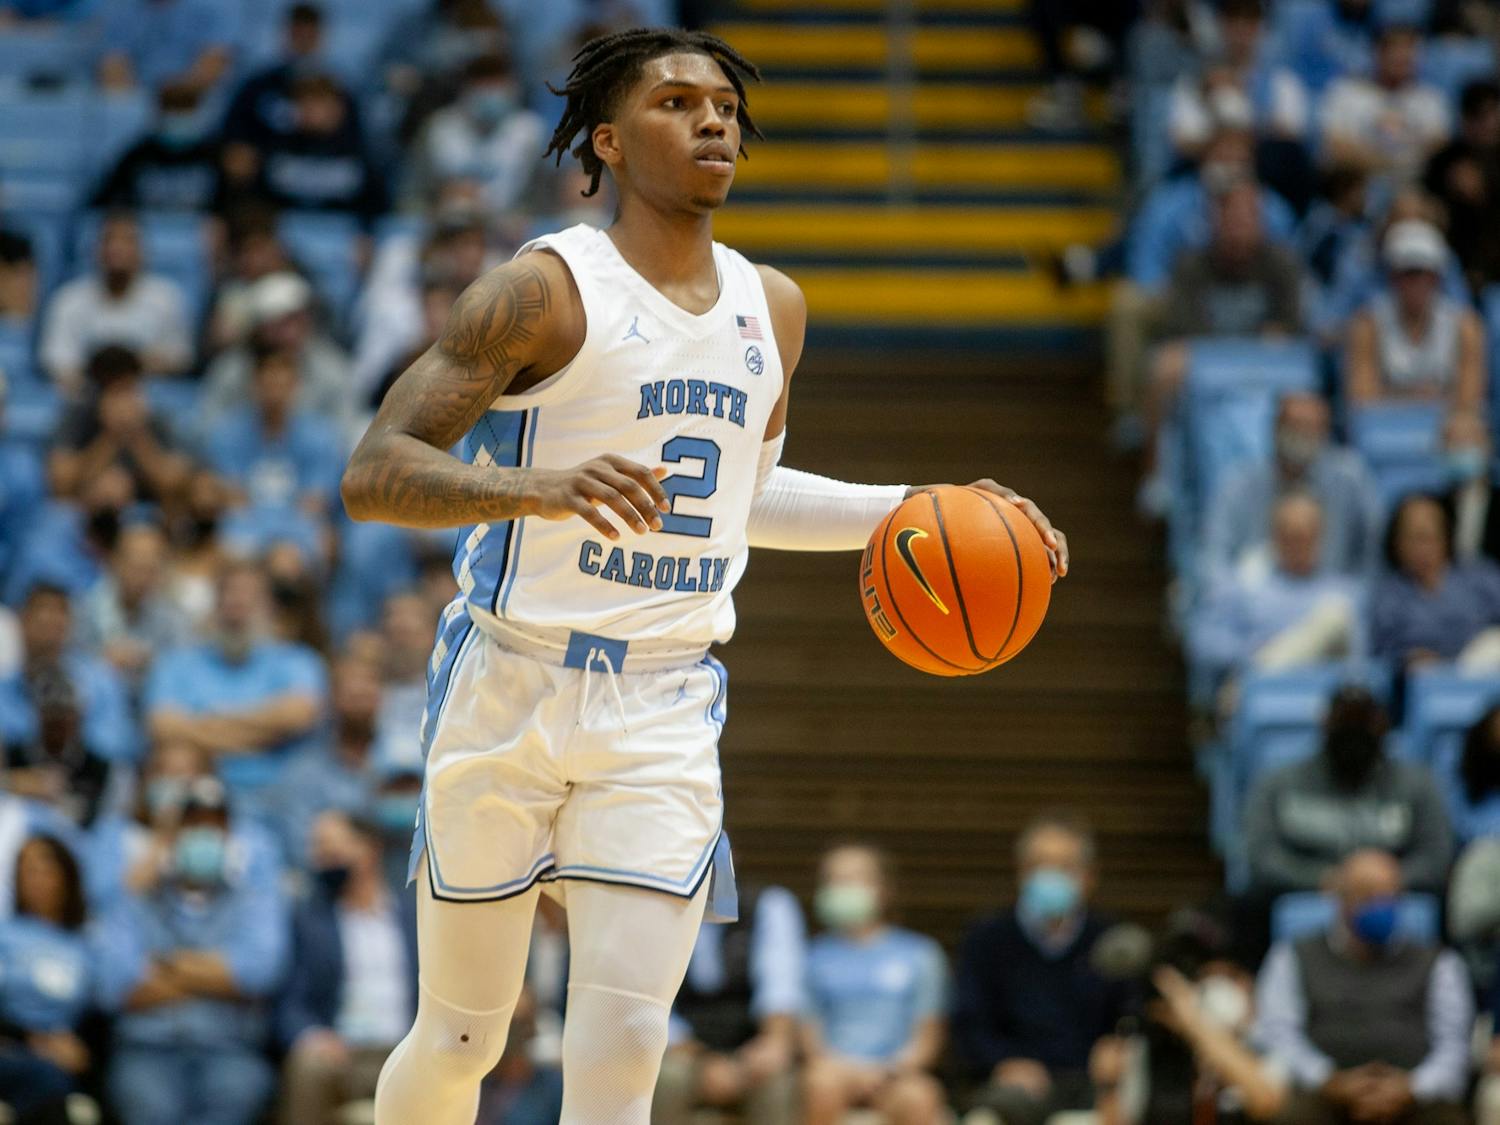 UNC sophomore guard Caleb Love (2) opens a play during the Tar Heels' game in the Smith Center on Nov. 9 against the Loyola Ramblers. UNC won 83-67.